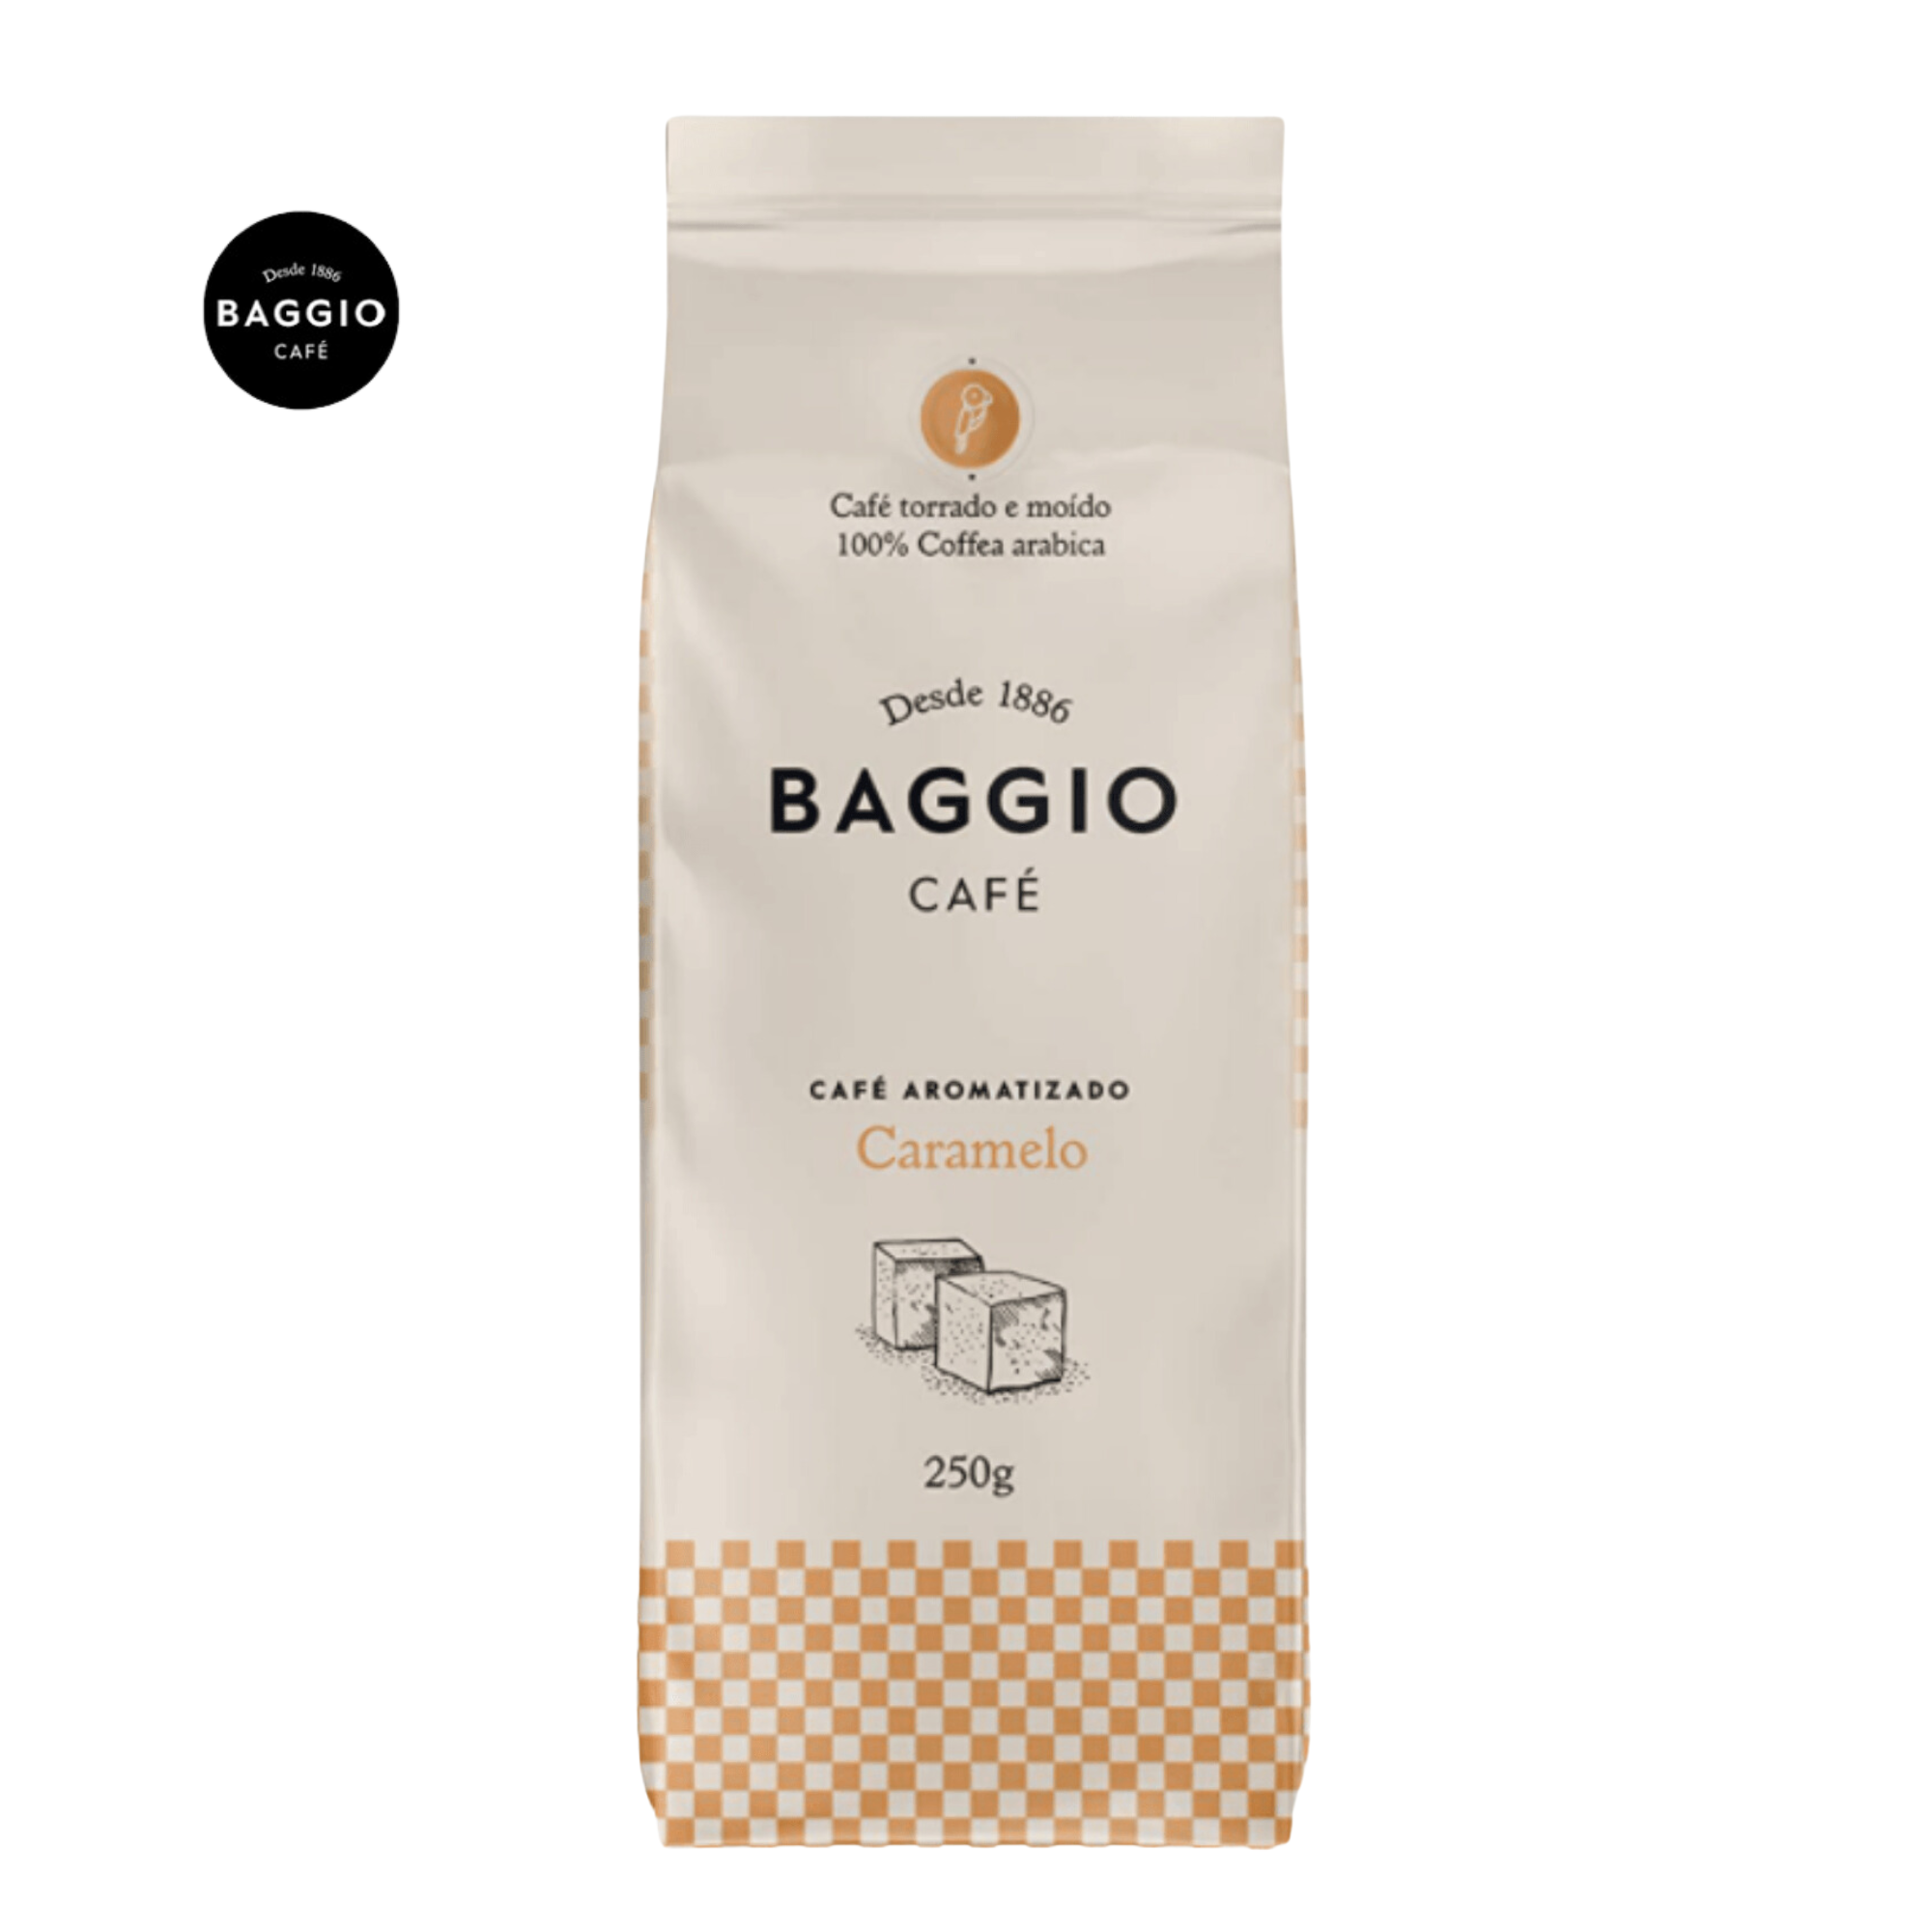 Pack of 10 BAGGIO Aromas Caramel Roasted and Ground Coffee - 2.5kg (88oz) Lactose-free - Gluten-free MKPBR - Brazilian Brands Worldwide